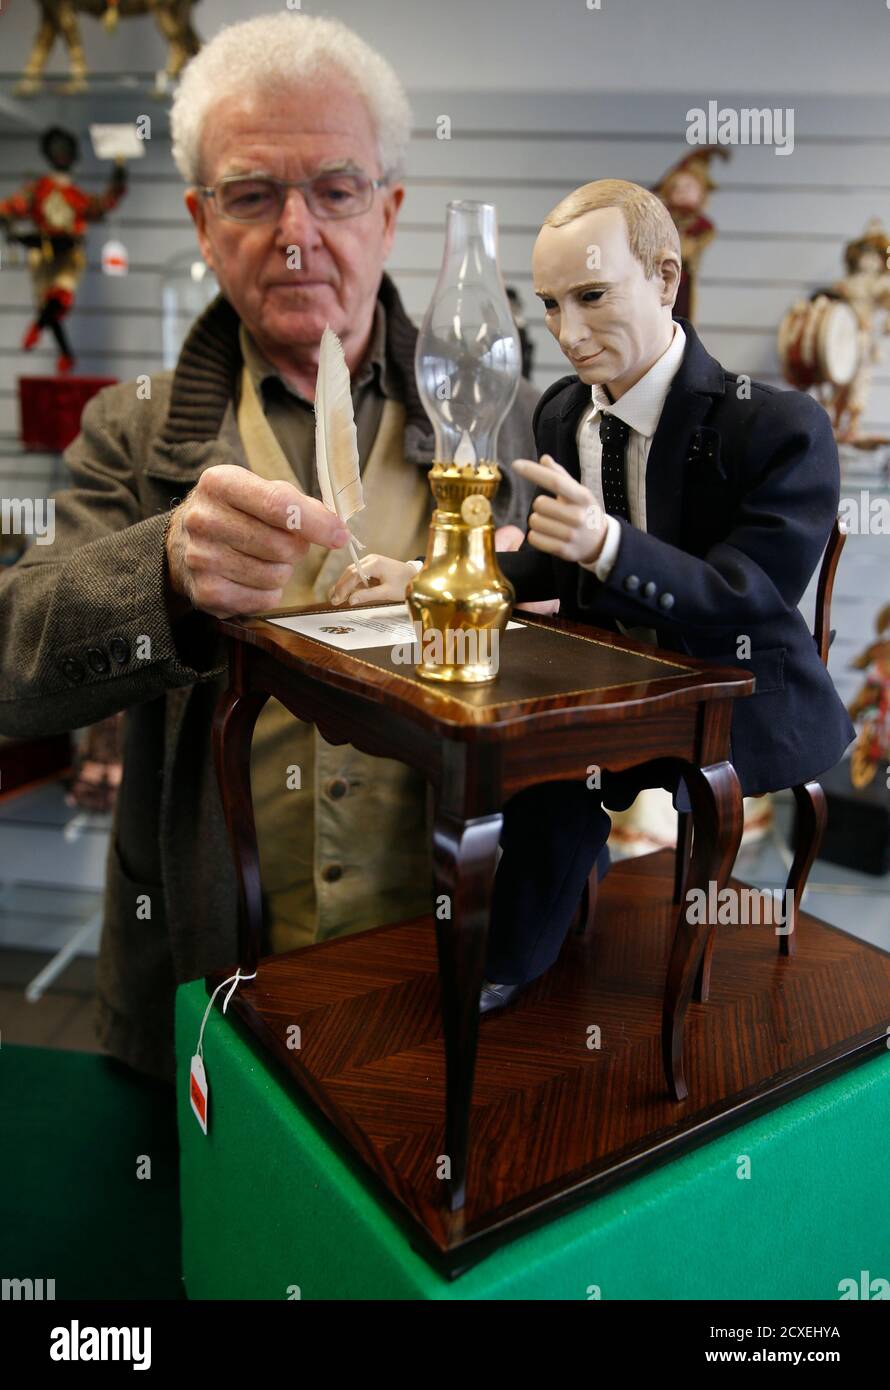 Uwe Breker, the world's leading auctioneer of Technical Antiques fixes the quill pen to a contemporary Musical Automaton depicting Russian President Vladimir Putin, in Cologne October 27, 2014. Inspired by Gustave Vichy's automaton 'Pierrot Ecrivain' of 1895, French artist Christian Baily of Paris portrays Putin signing the 'Treaty of Acceptance of the Republic Crimea into the Russian Federation' from March 18, 2014. The starting price of the automaton in the November 15 auction in Cologne, will be at 18,000 euros (US $ 22,900).  Putin is portrayed with blue glass eyes and molded hair, seated  Stock Photo